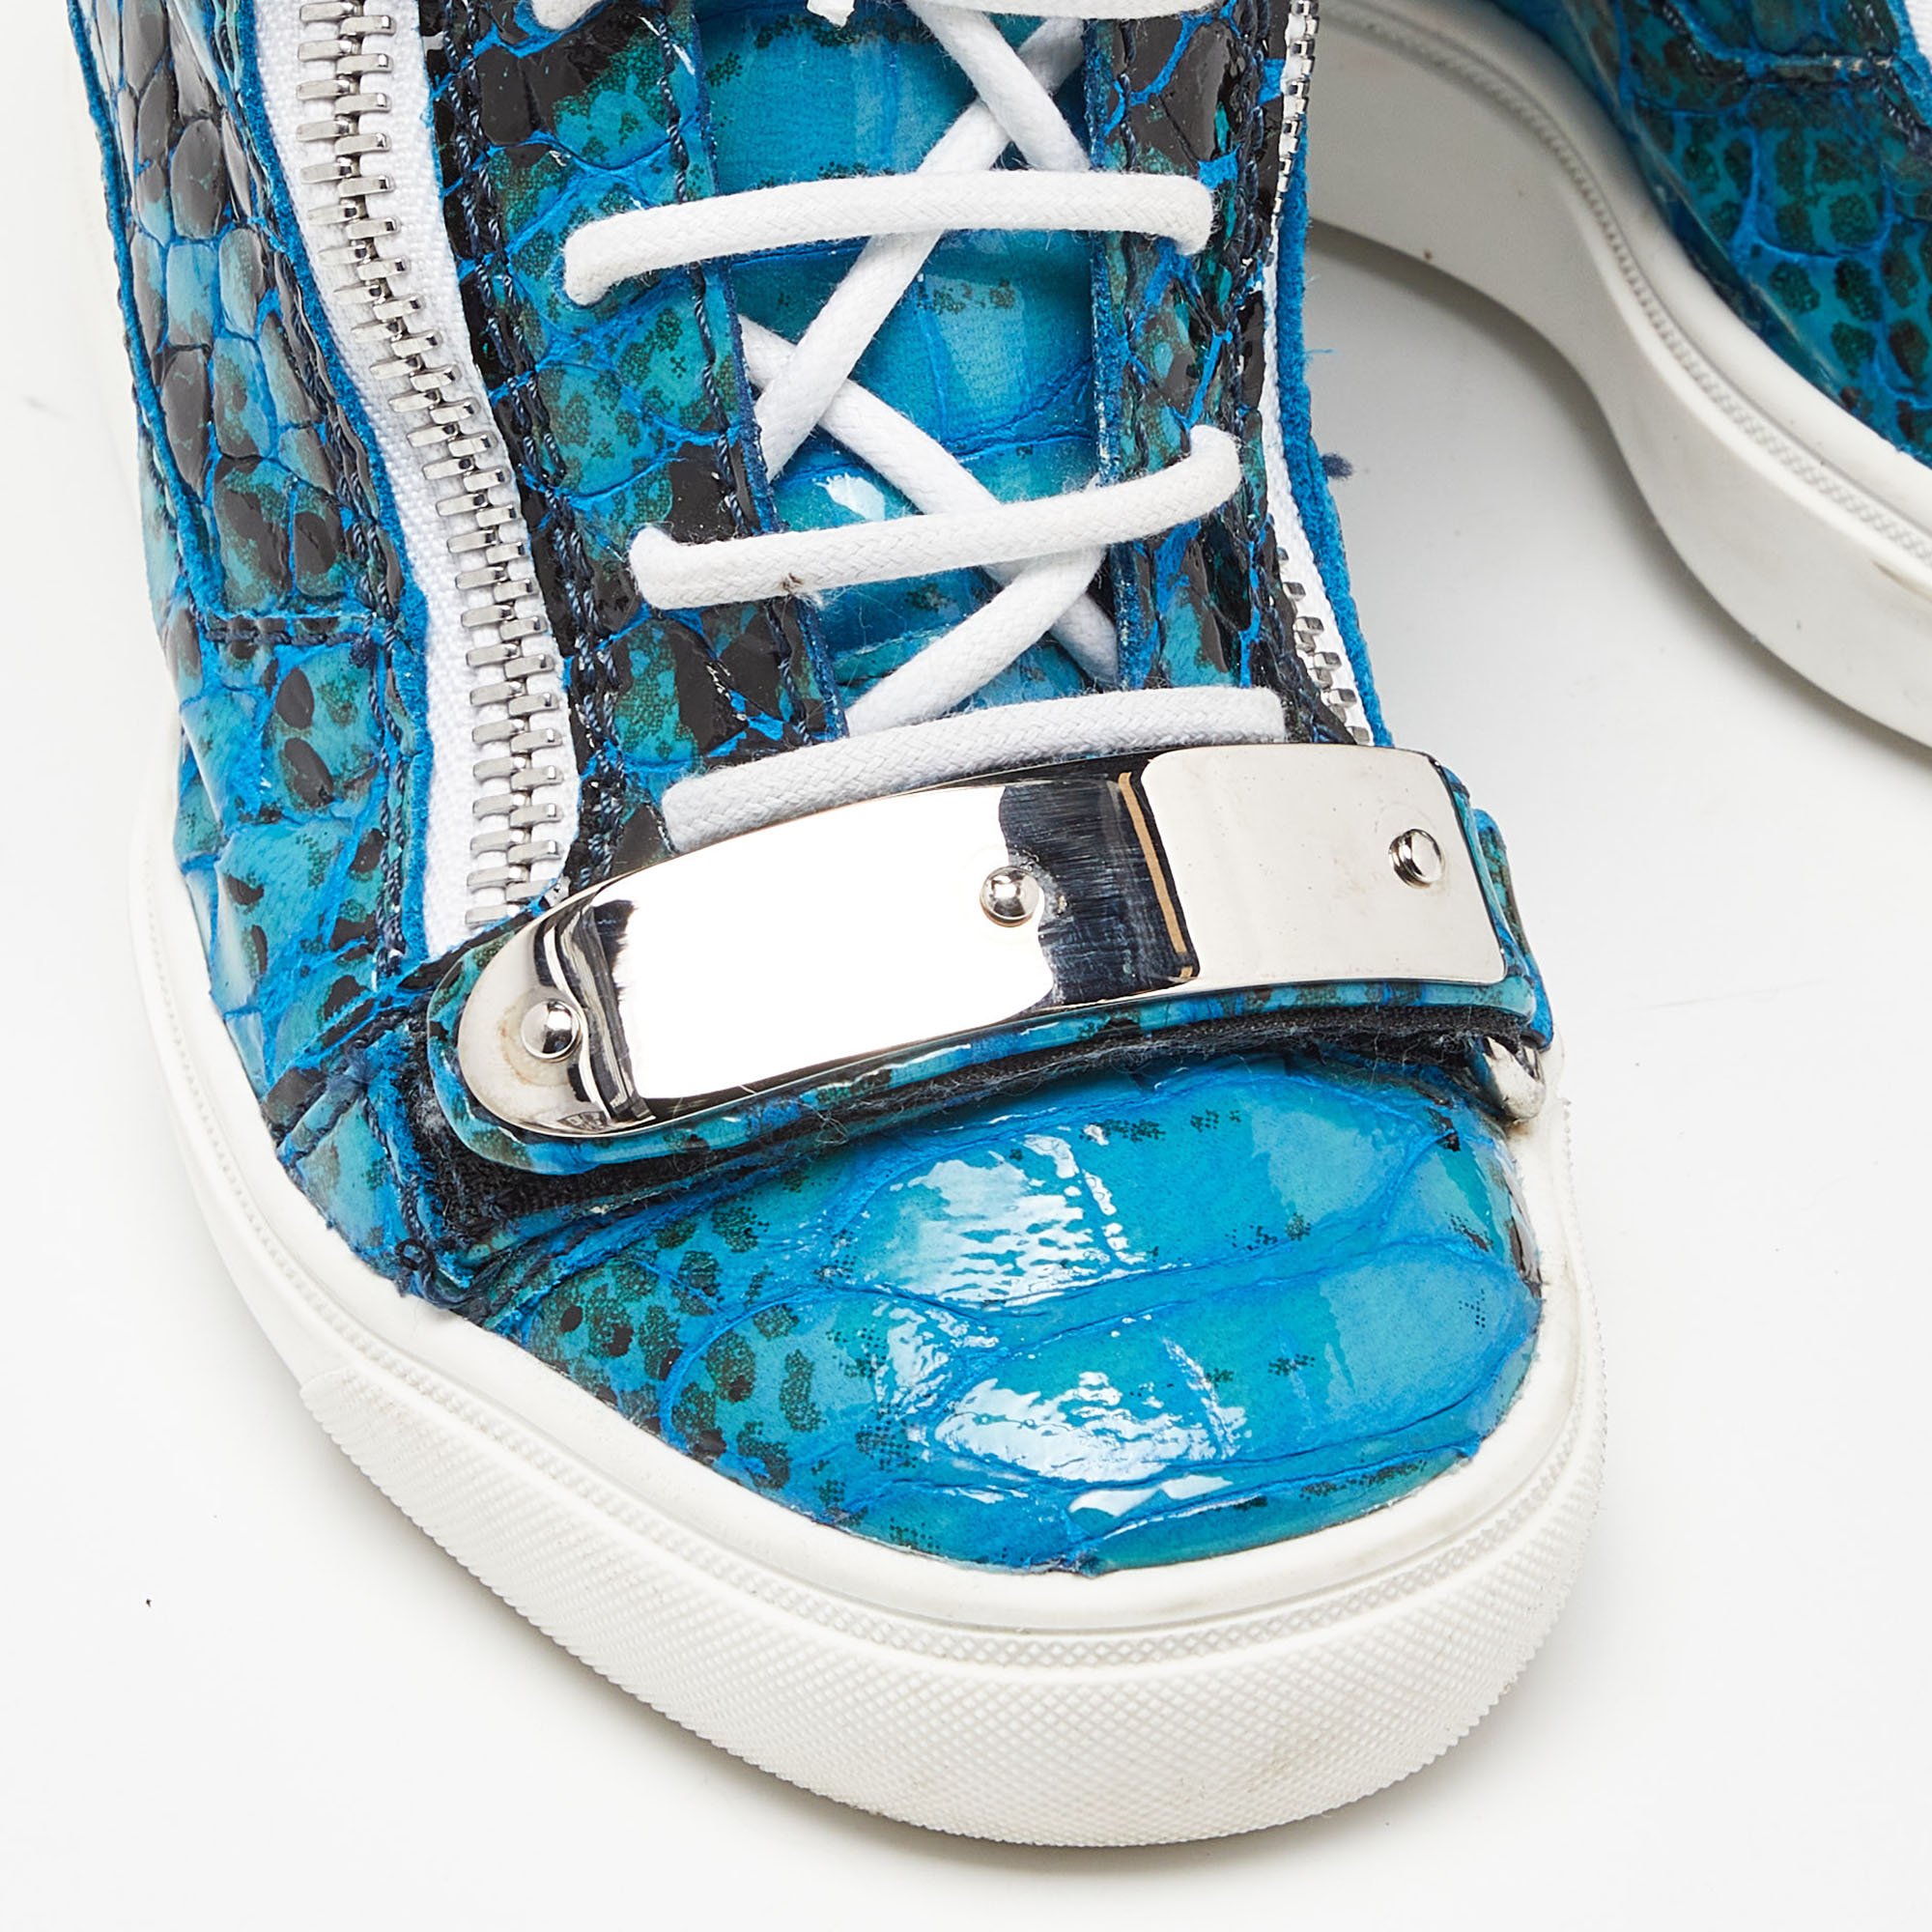 Giuseppe Zanotti Tricolor Embossed Python And Leather Coby Wedge Sneakers Size 37.5